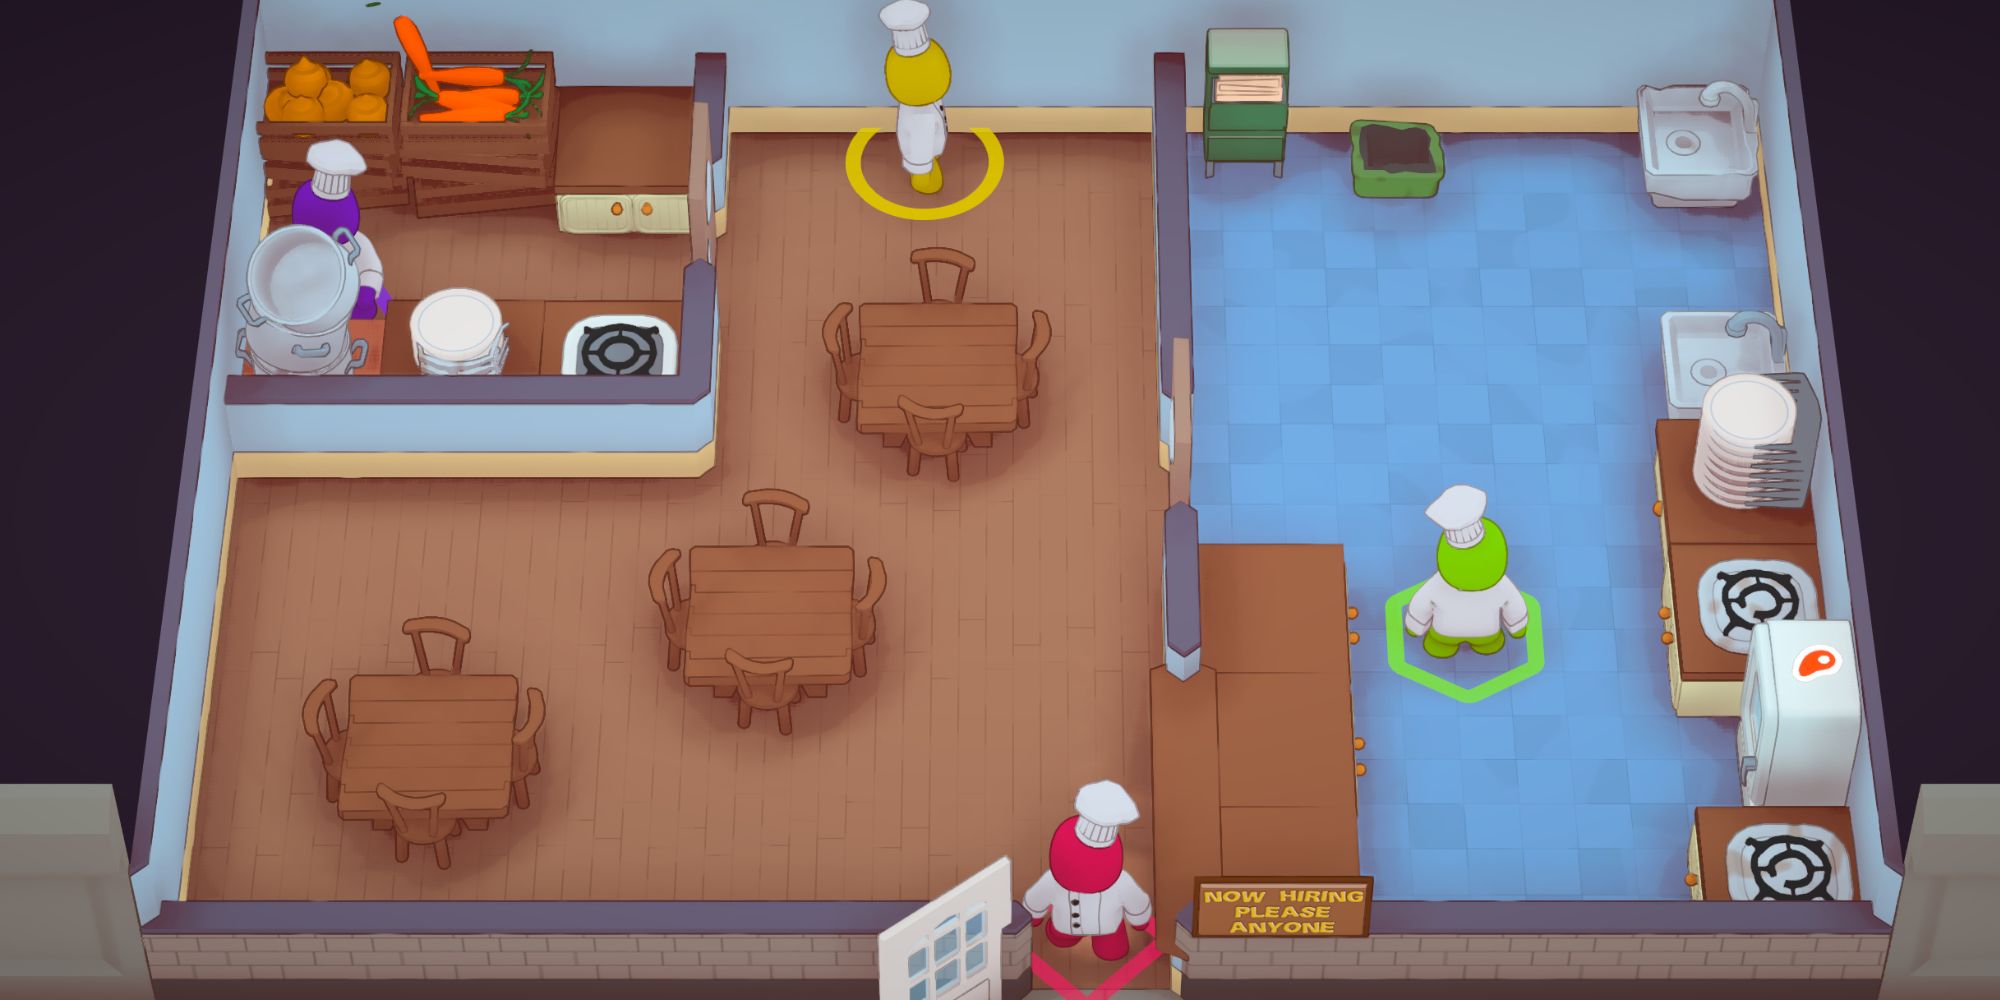 Plate Up new game multiplayer with 4 cooks in a basic kitchen